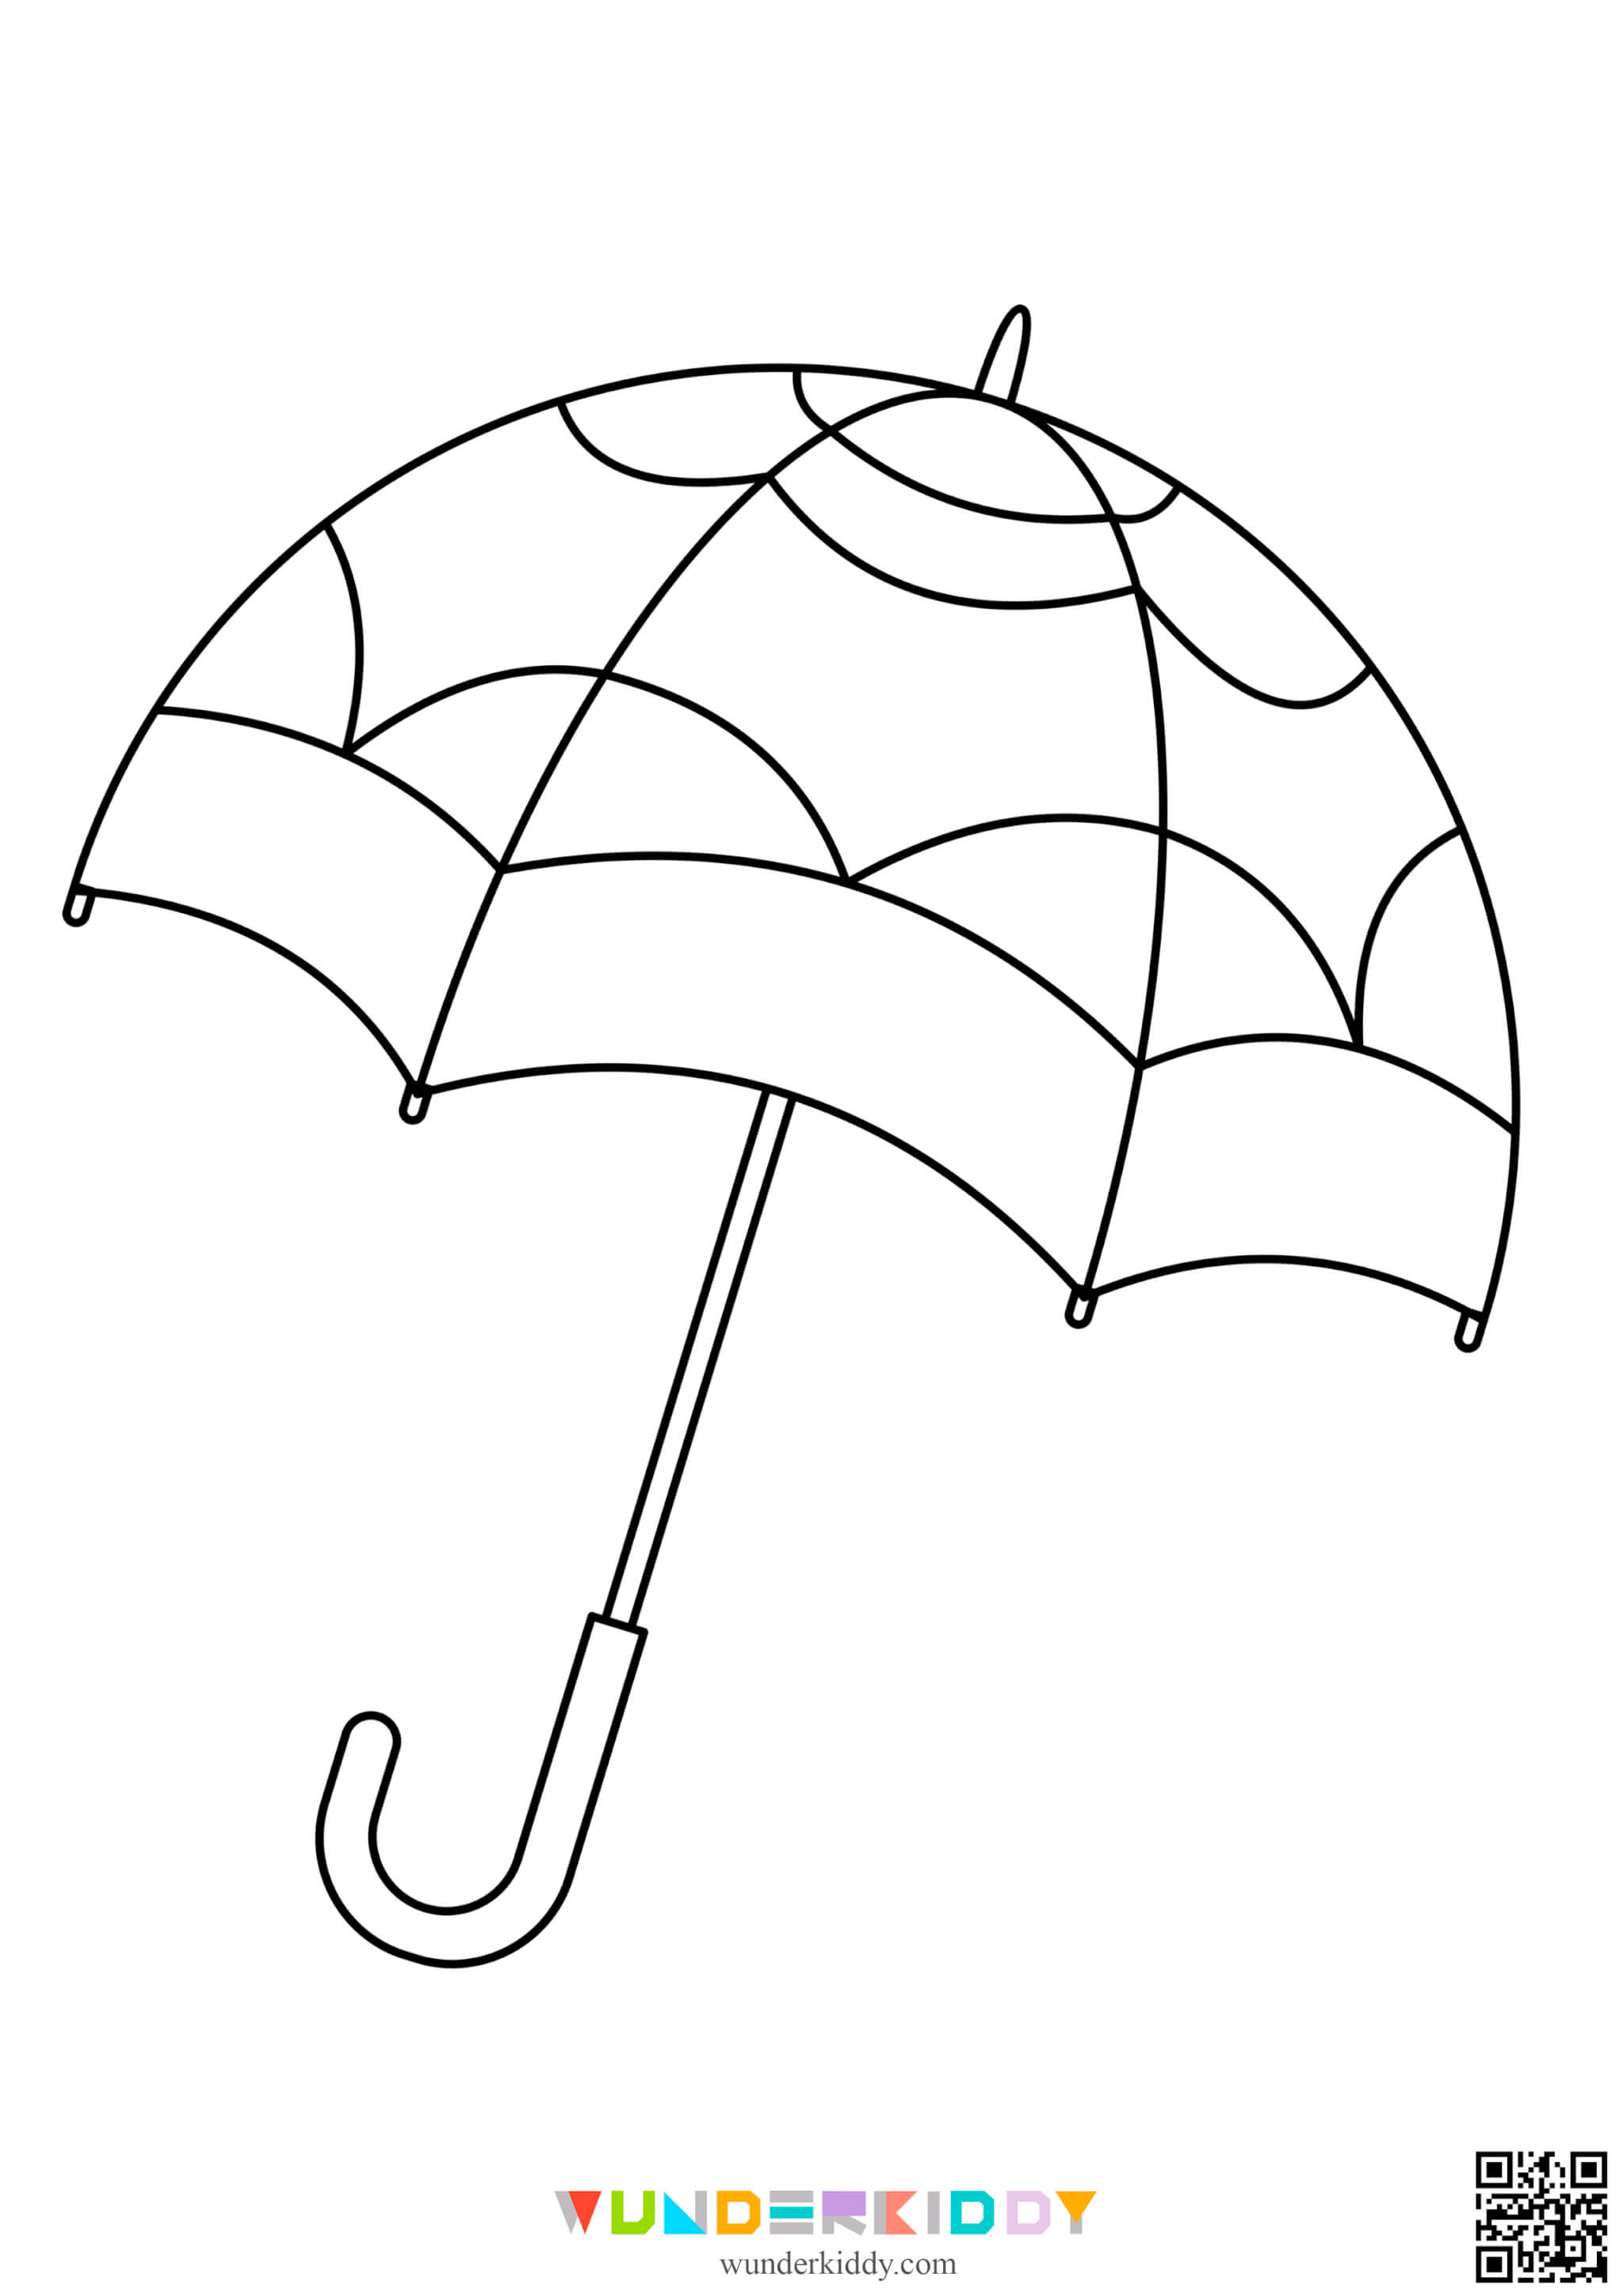 Umbrella Coloring Pages for Kids - Image 9